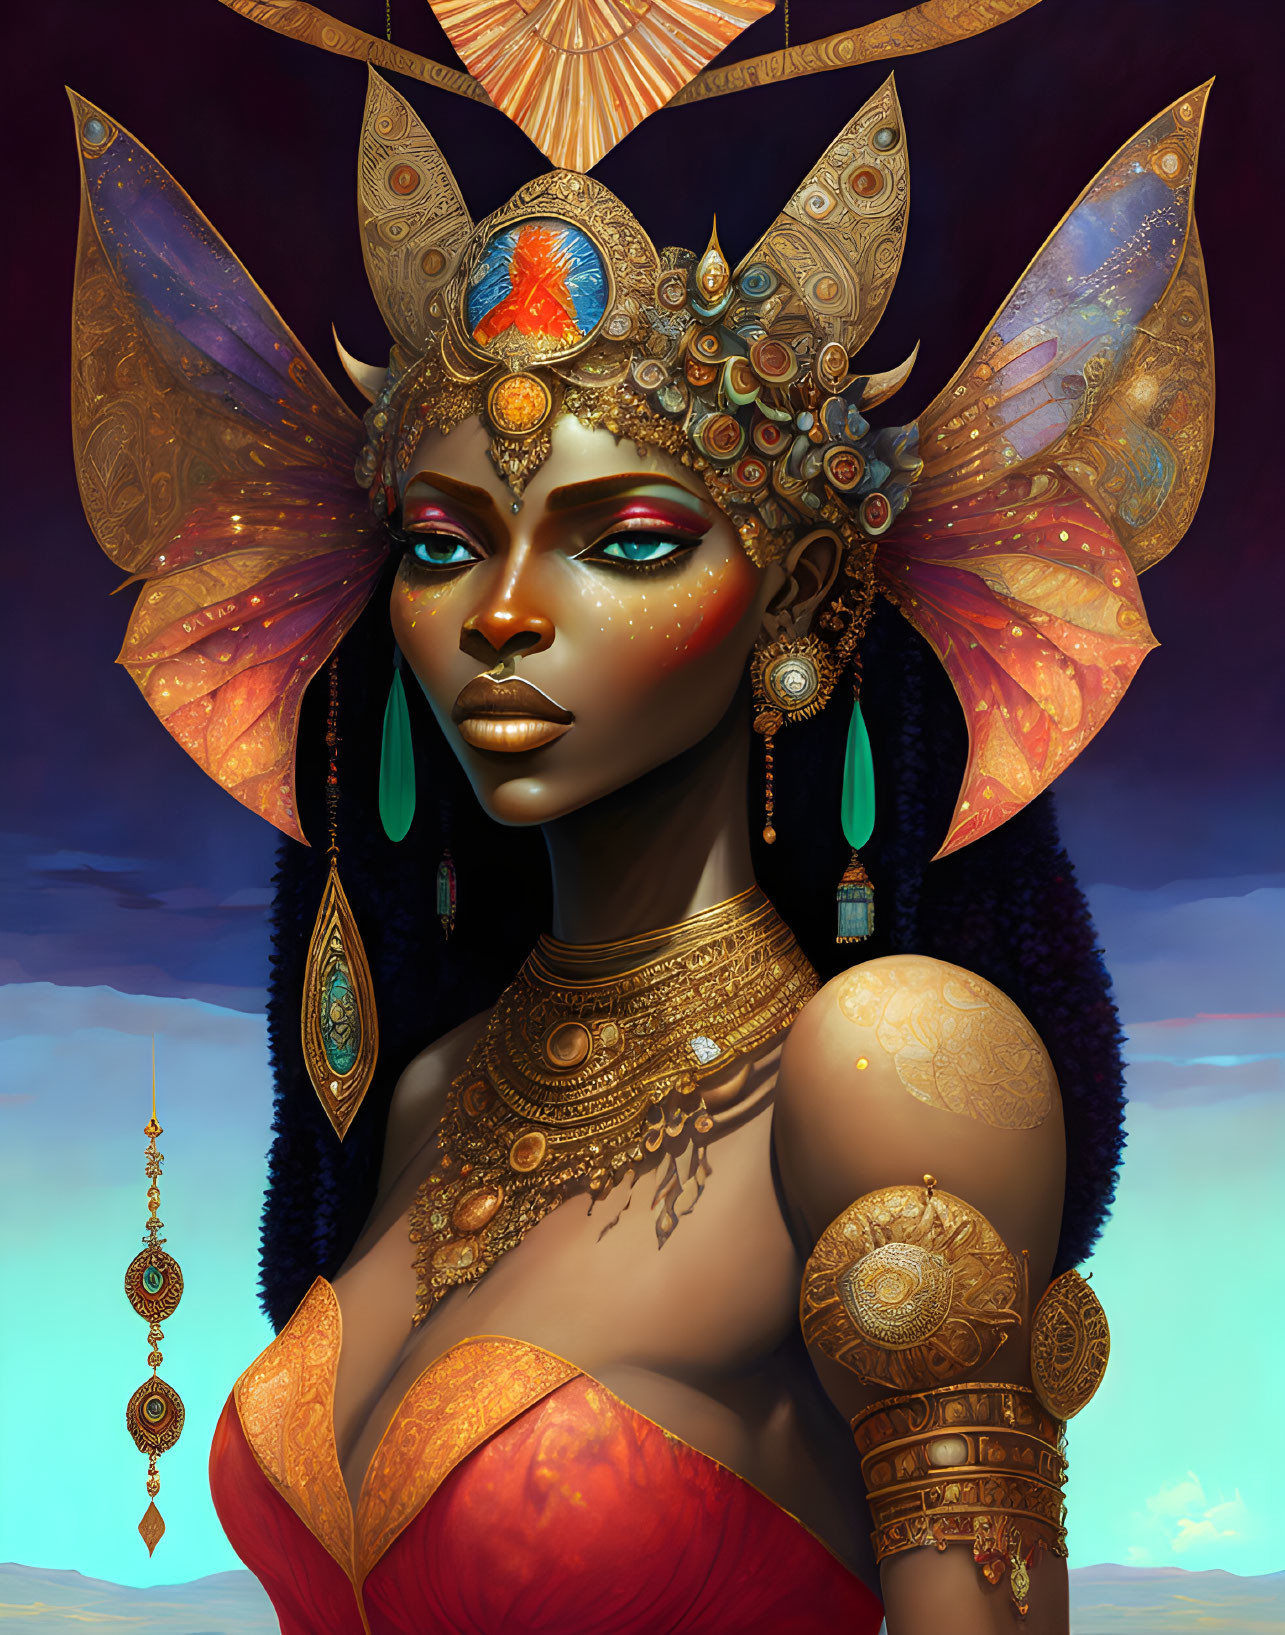 Illustration of woman with dark skin and golden jewelry under blue sky